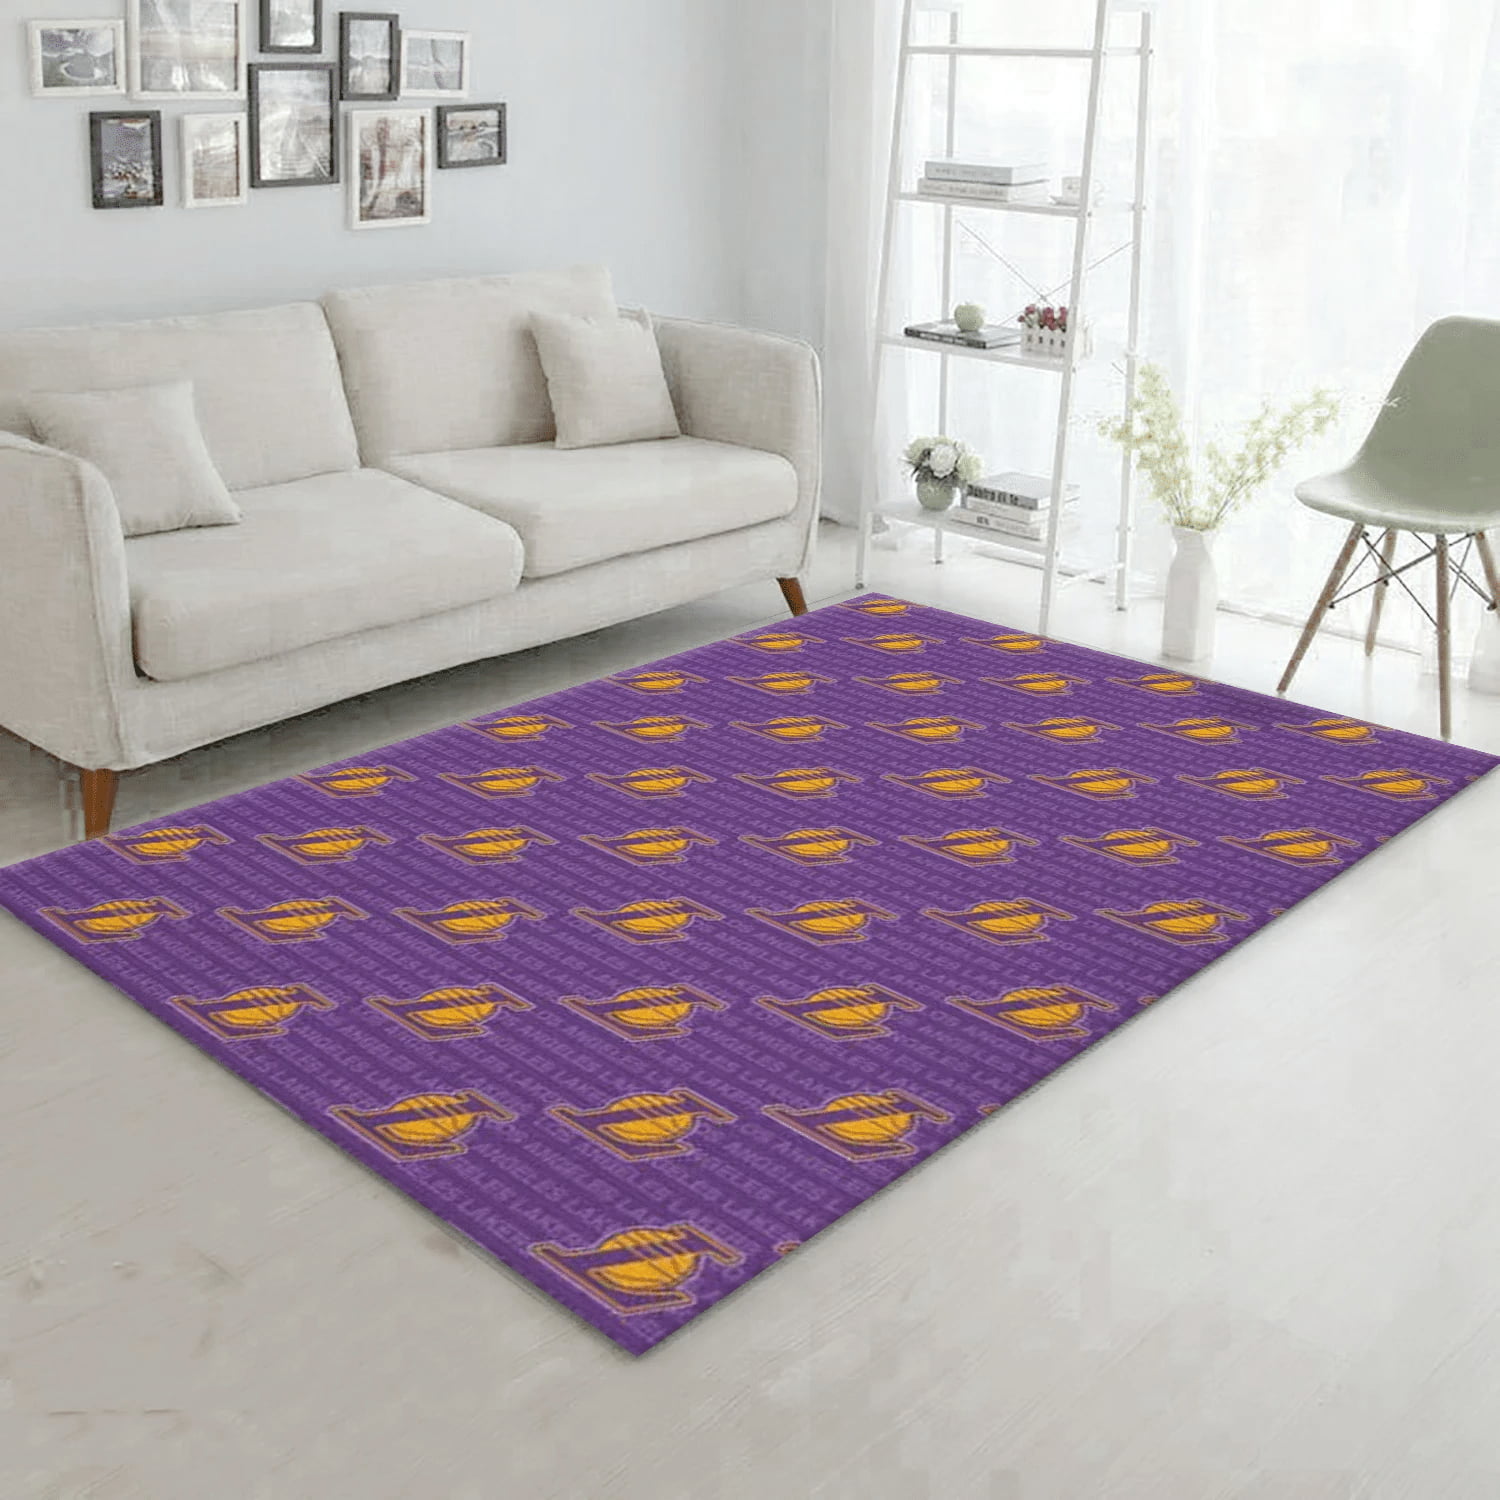 Los Angeles Lakers Patterns 1 Reangle Area Rug, Bedroom Rug - Family Gift US Decor - Indoor Outdoor Rugs